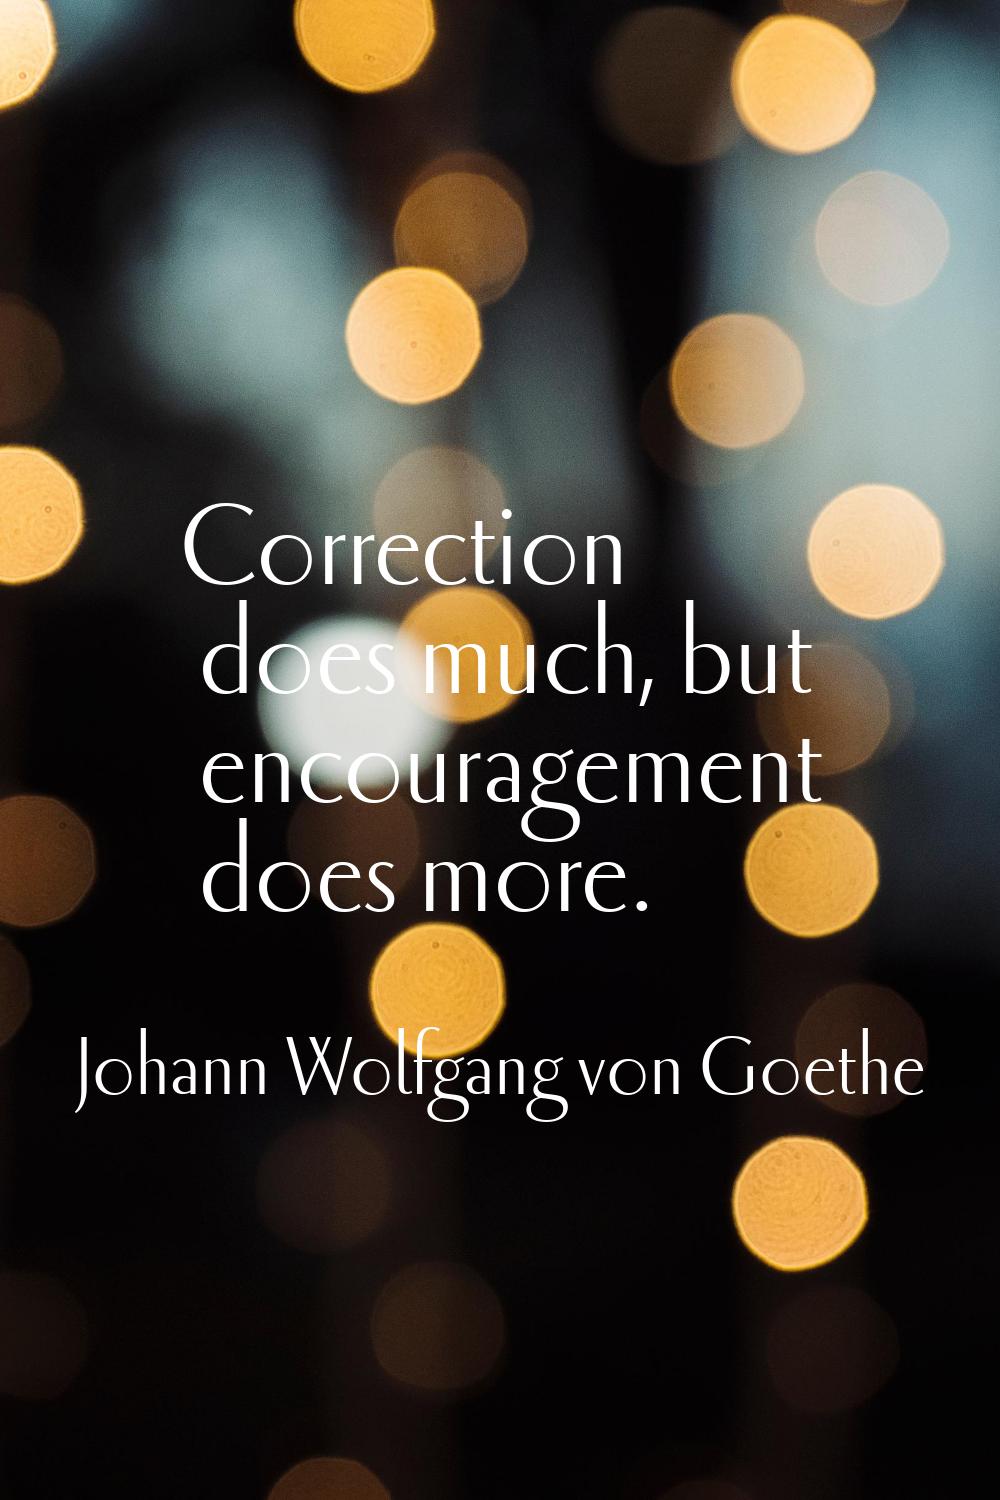 Correction does much, but encouragement does more.